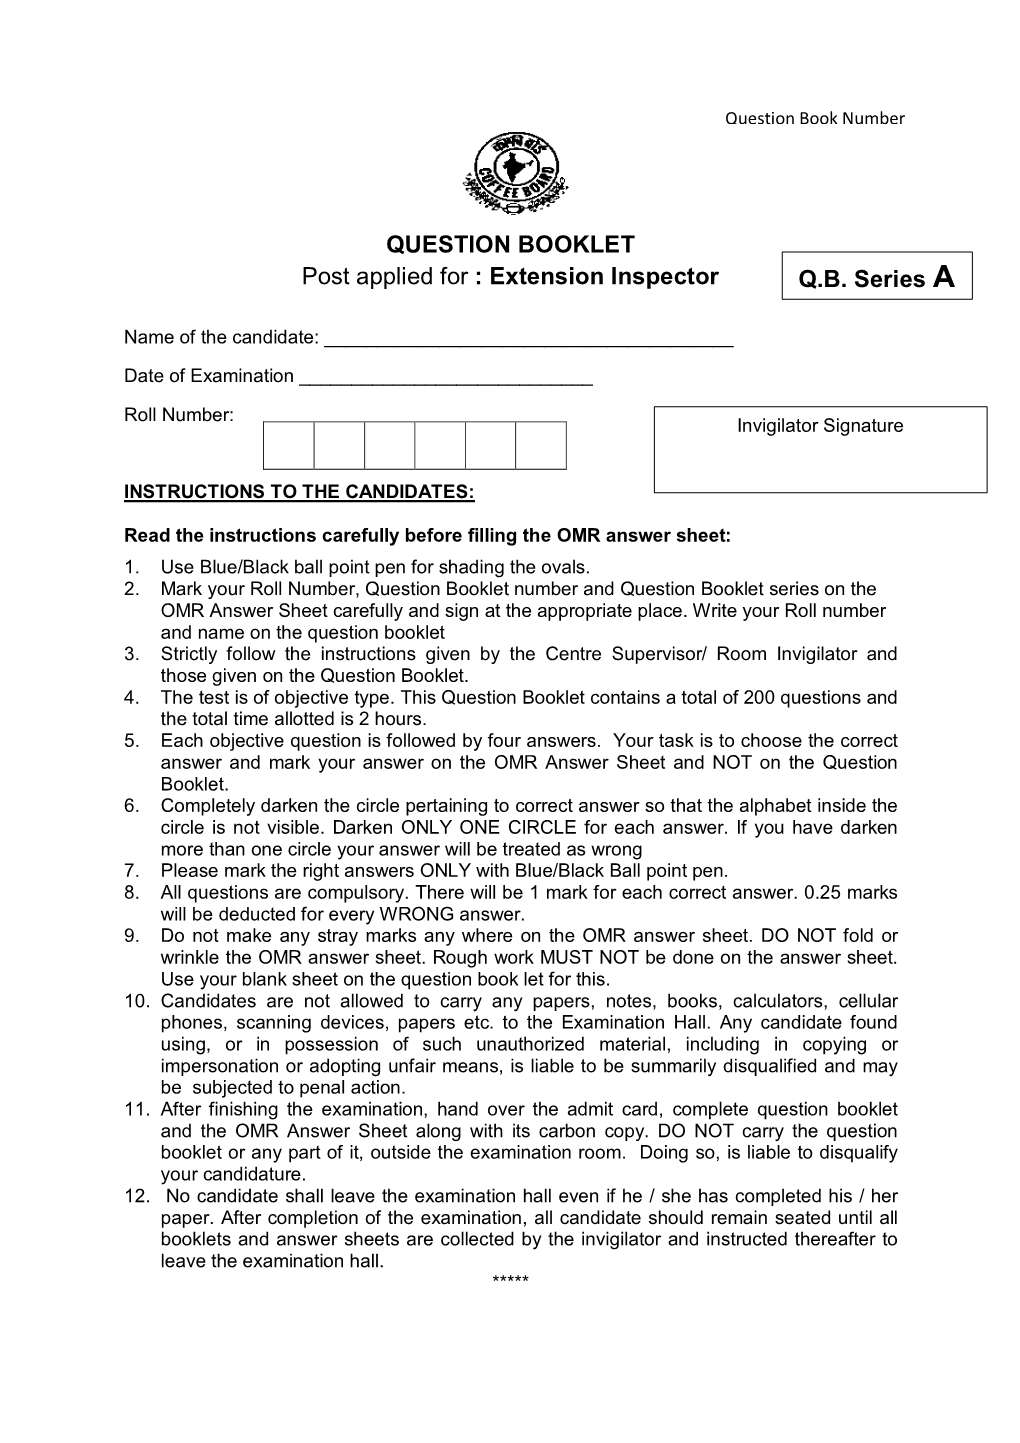 QUESTION BOOKLET Post Applied for : Extension Inspector Q.B. Series A